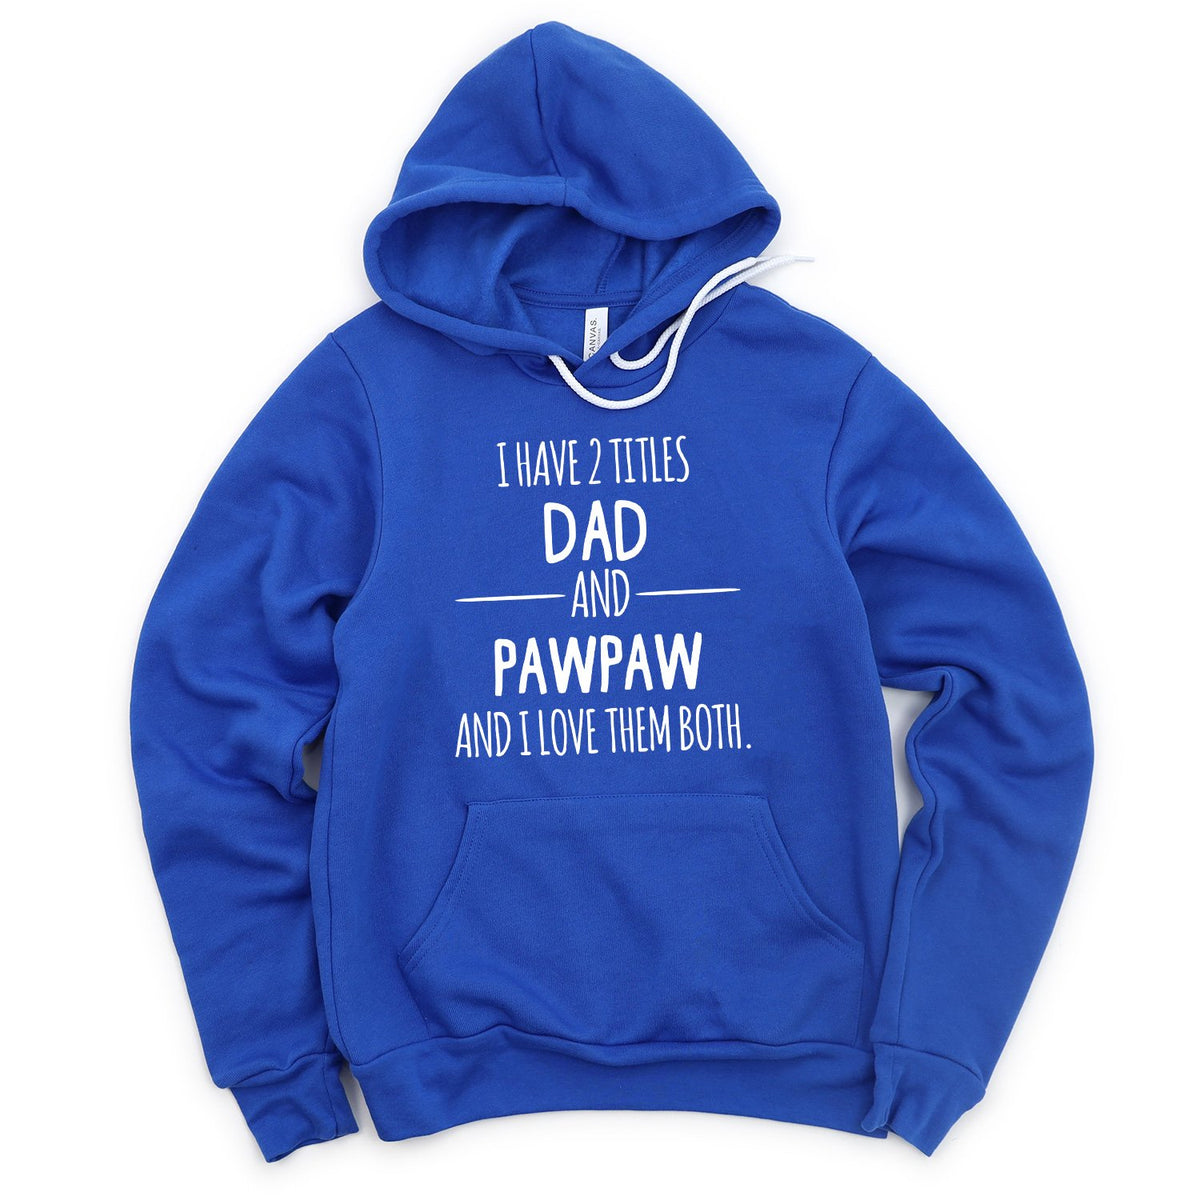 I Have 2 Titles Dad and PawPaw and I Love Them Both - Hoodie Sweatshirt